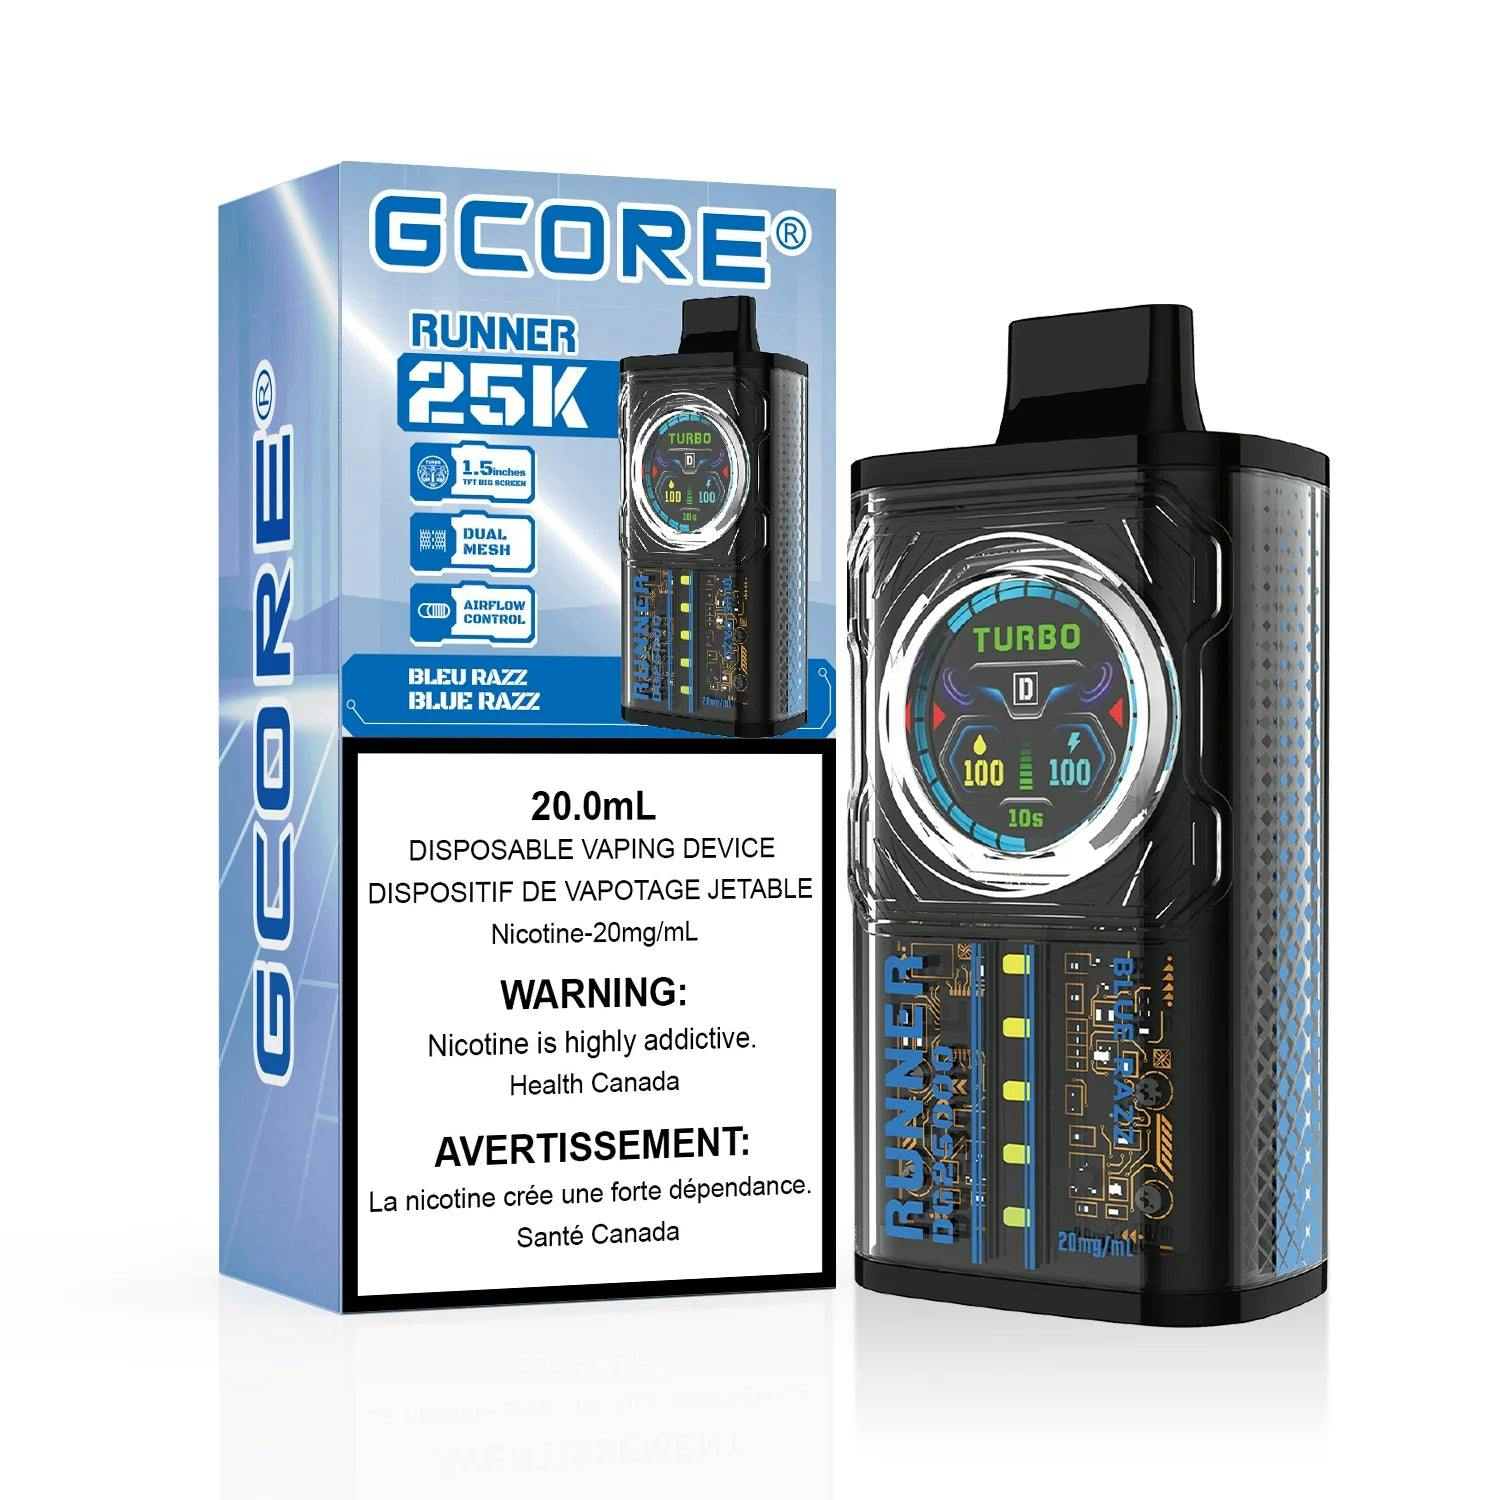 GCORE RUNNER 25K - 10CT  = Excise Version-undefined | For sale Jubilee Distributors